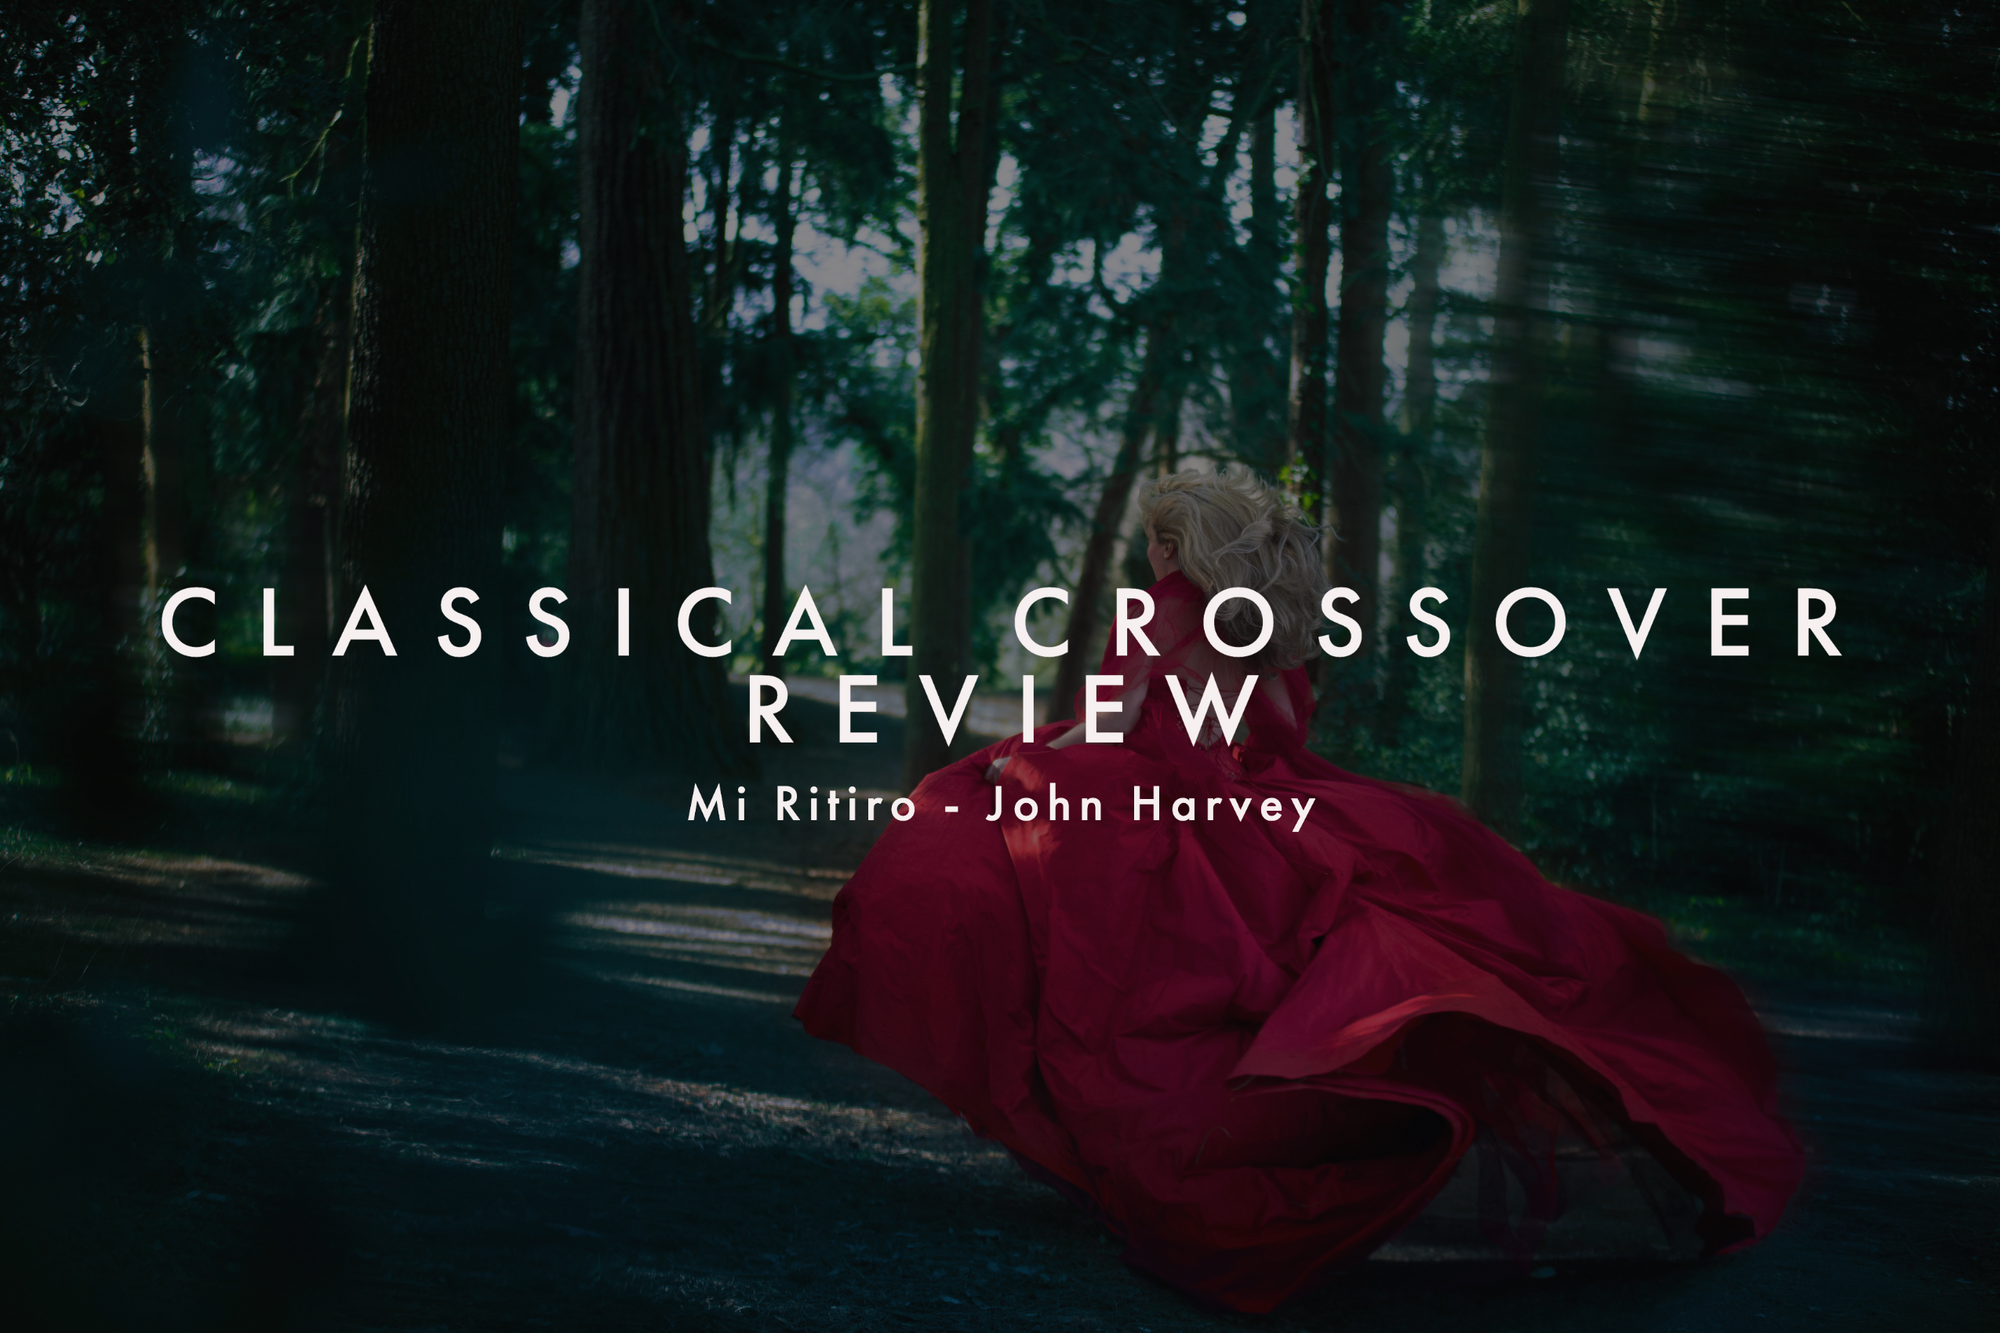 Classical Crossover Review by John Harvey